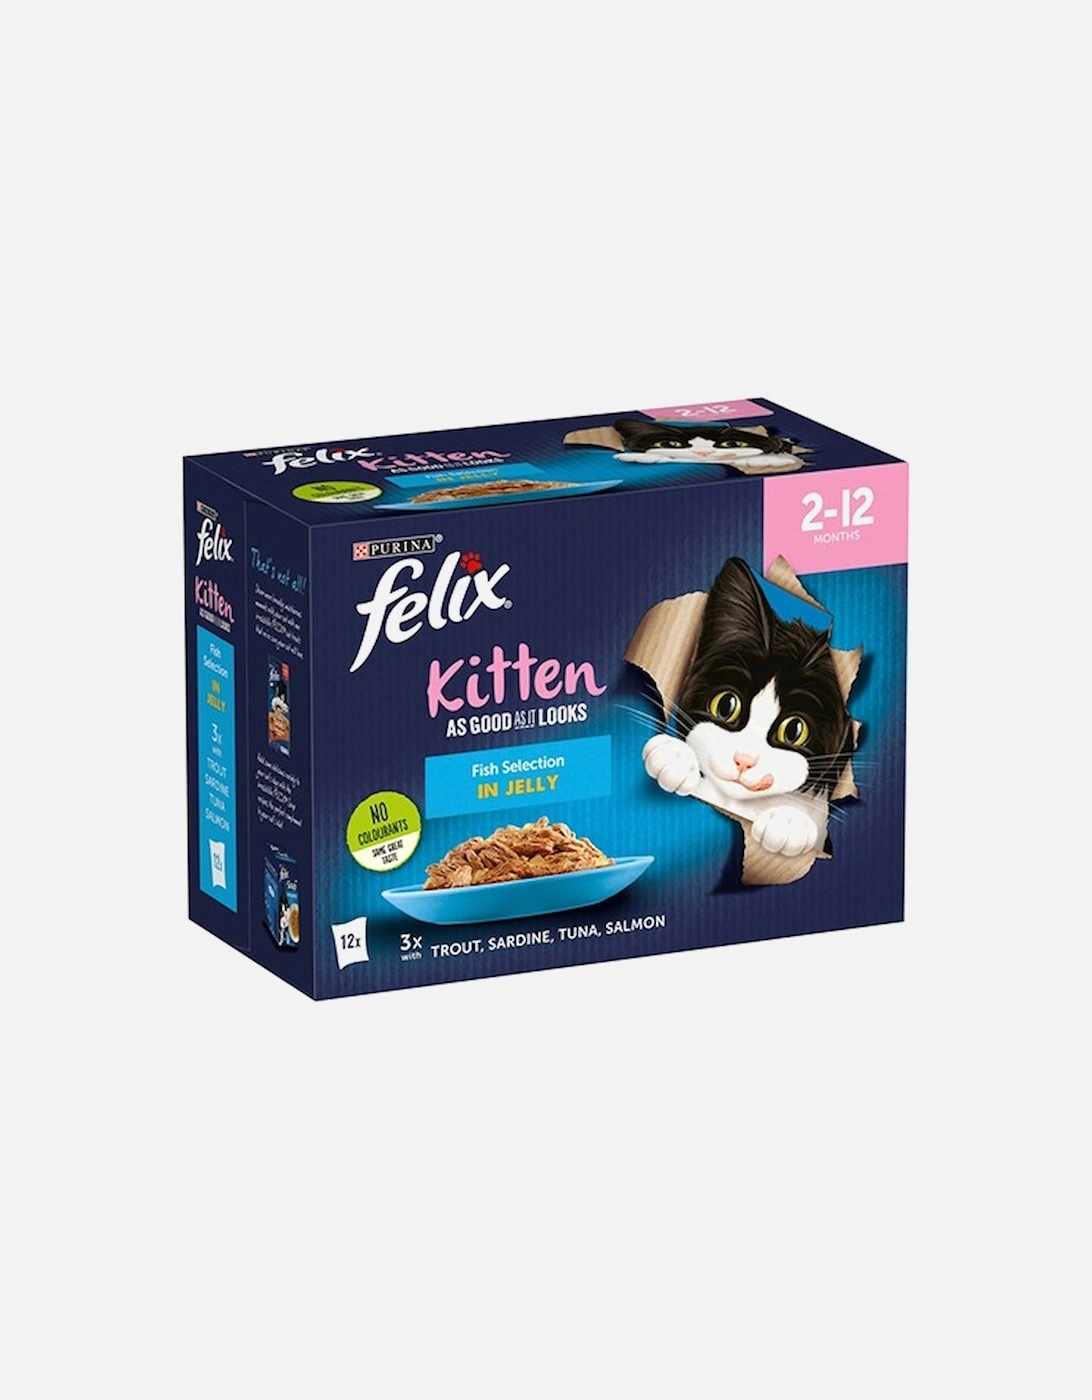 Felix As Good As It Looks Kitten Fish Selection In Jelly 12 x 100g Pouches, 5 of 4